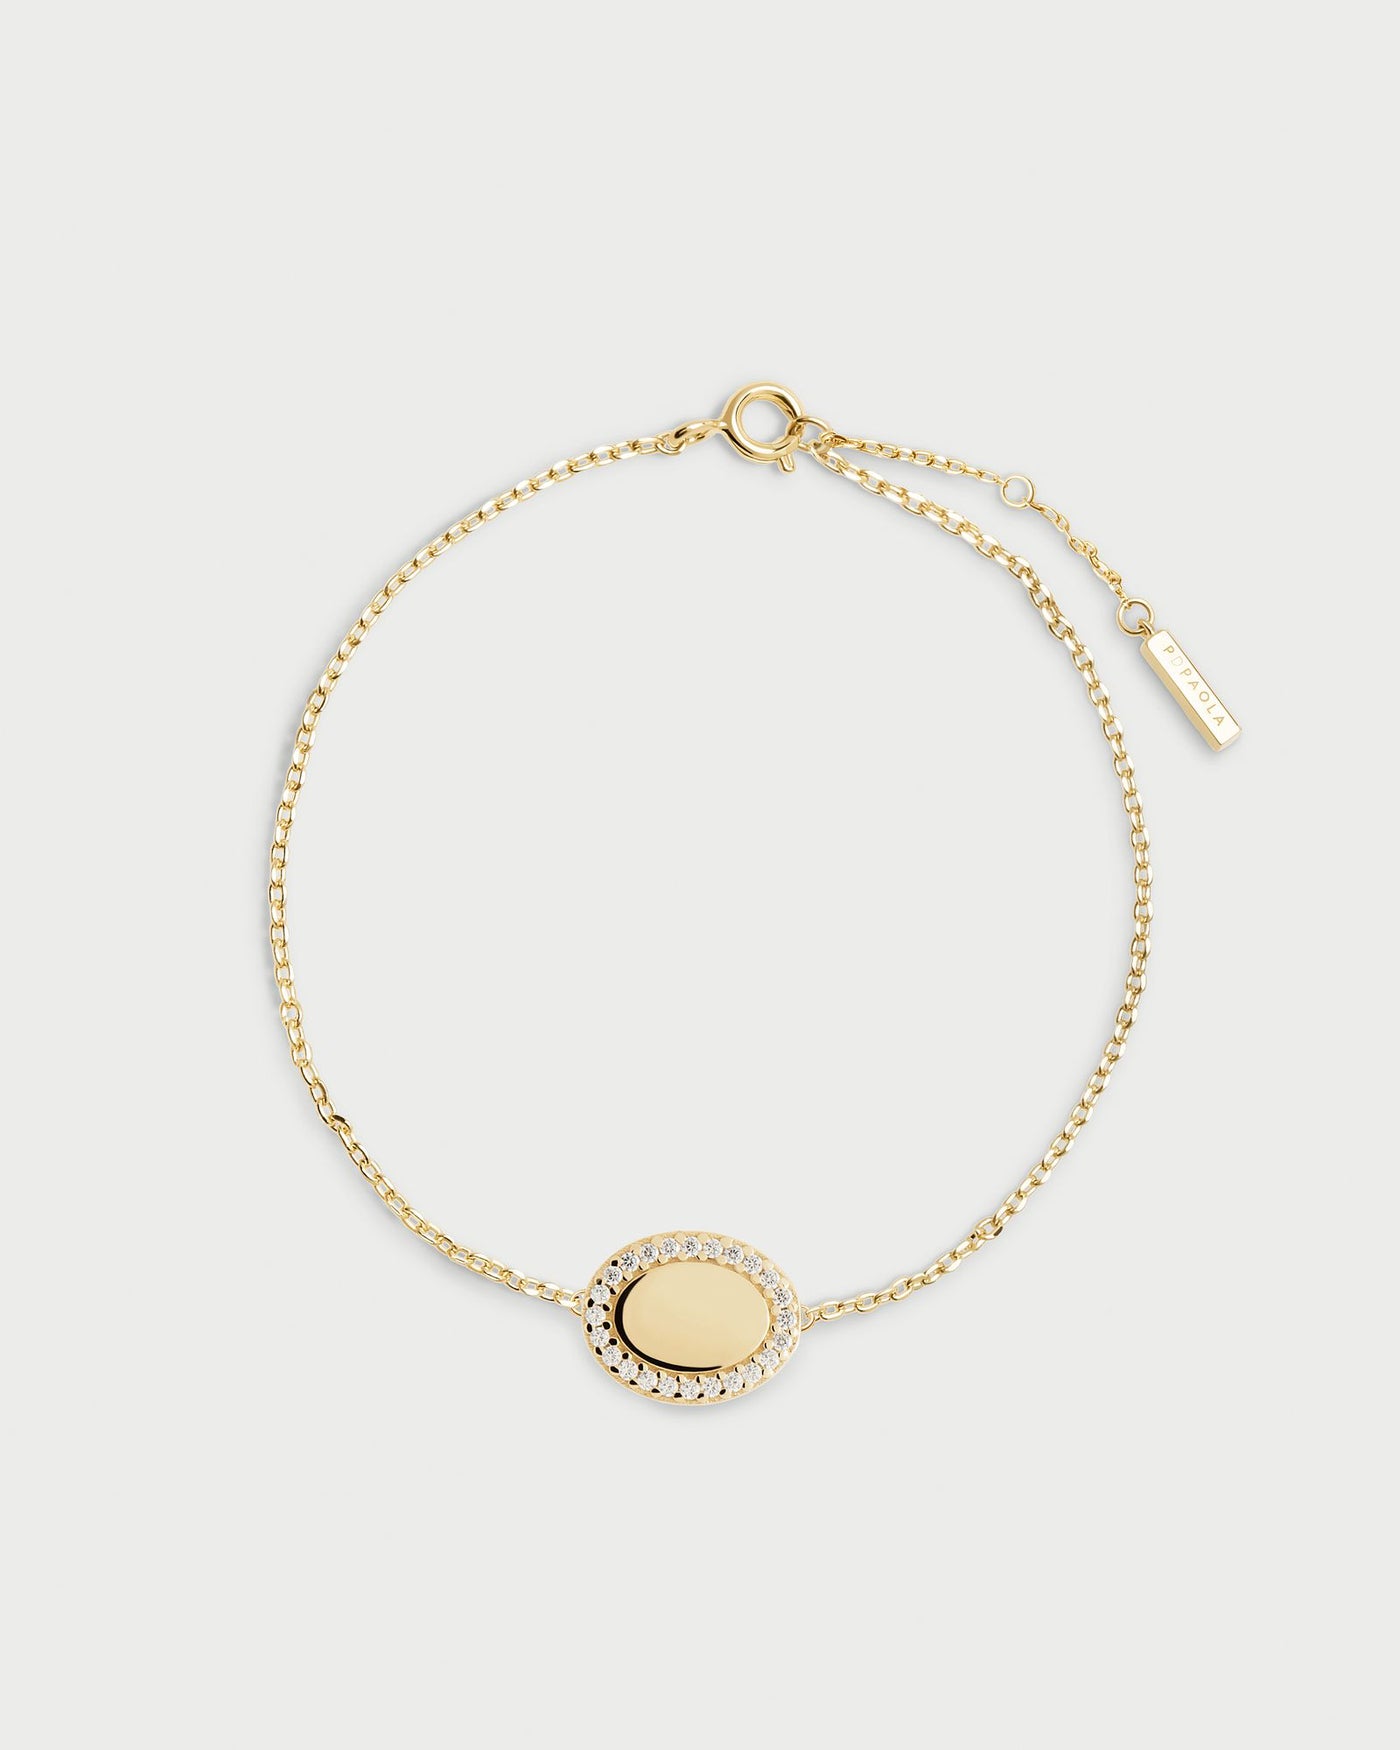 2024 Selection | Mademoiselle Bracelet. Gold-plated silver bracelet with engravable pendant circled by white zirconia. Get the latest arrival from PDPAOLA. Place your order safely and get this Best Seller. Free Shipping.